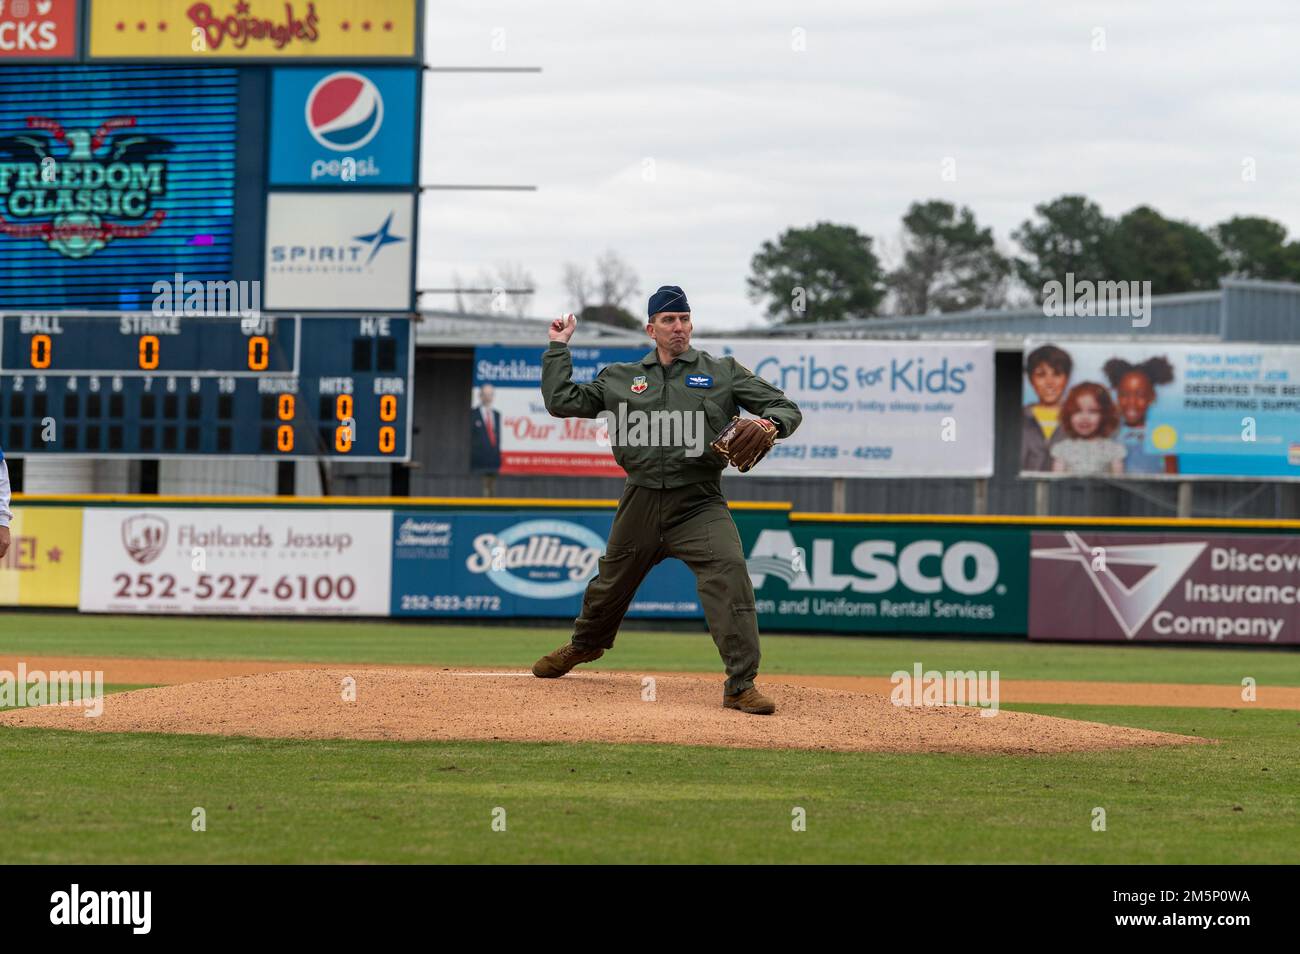 Col. Bryce Silver, 4th Fighter Wing vice commander, throws the first pitch during the 12th Annual Freedom Classic baseball series at Grainger Stadium in Kinston, North Carolina, Feb. 26, 2022. The first pitch is a long-standing tradition of baseball, in which a guest of honor throws a ball to mark the end of pregame festivities and the start of the game. Stock Photo